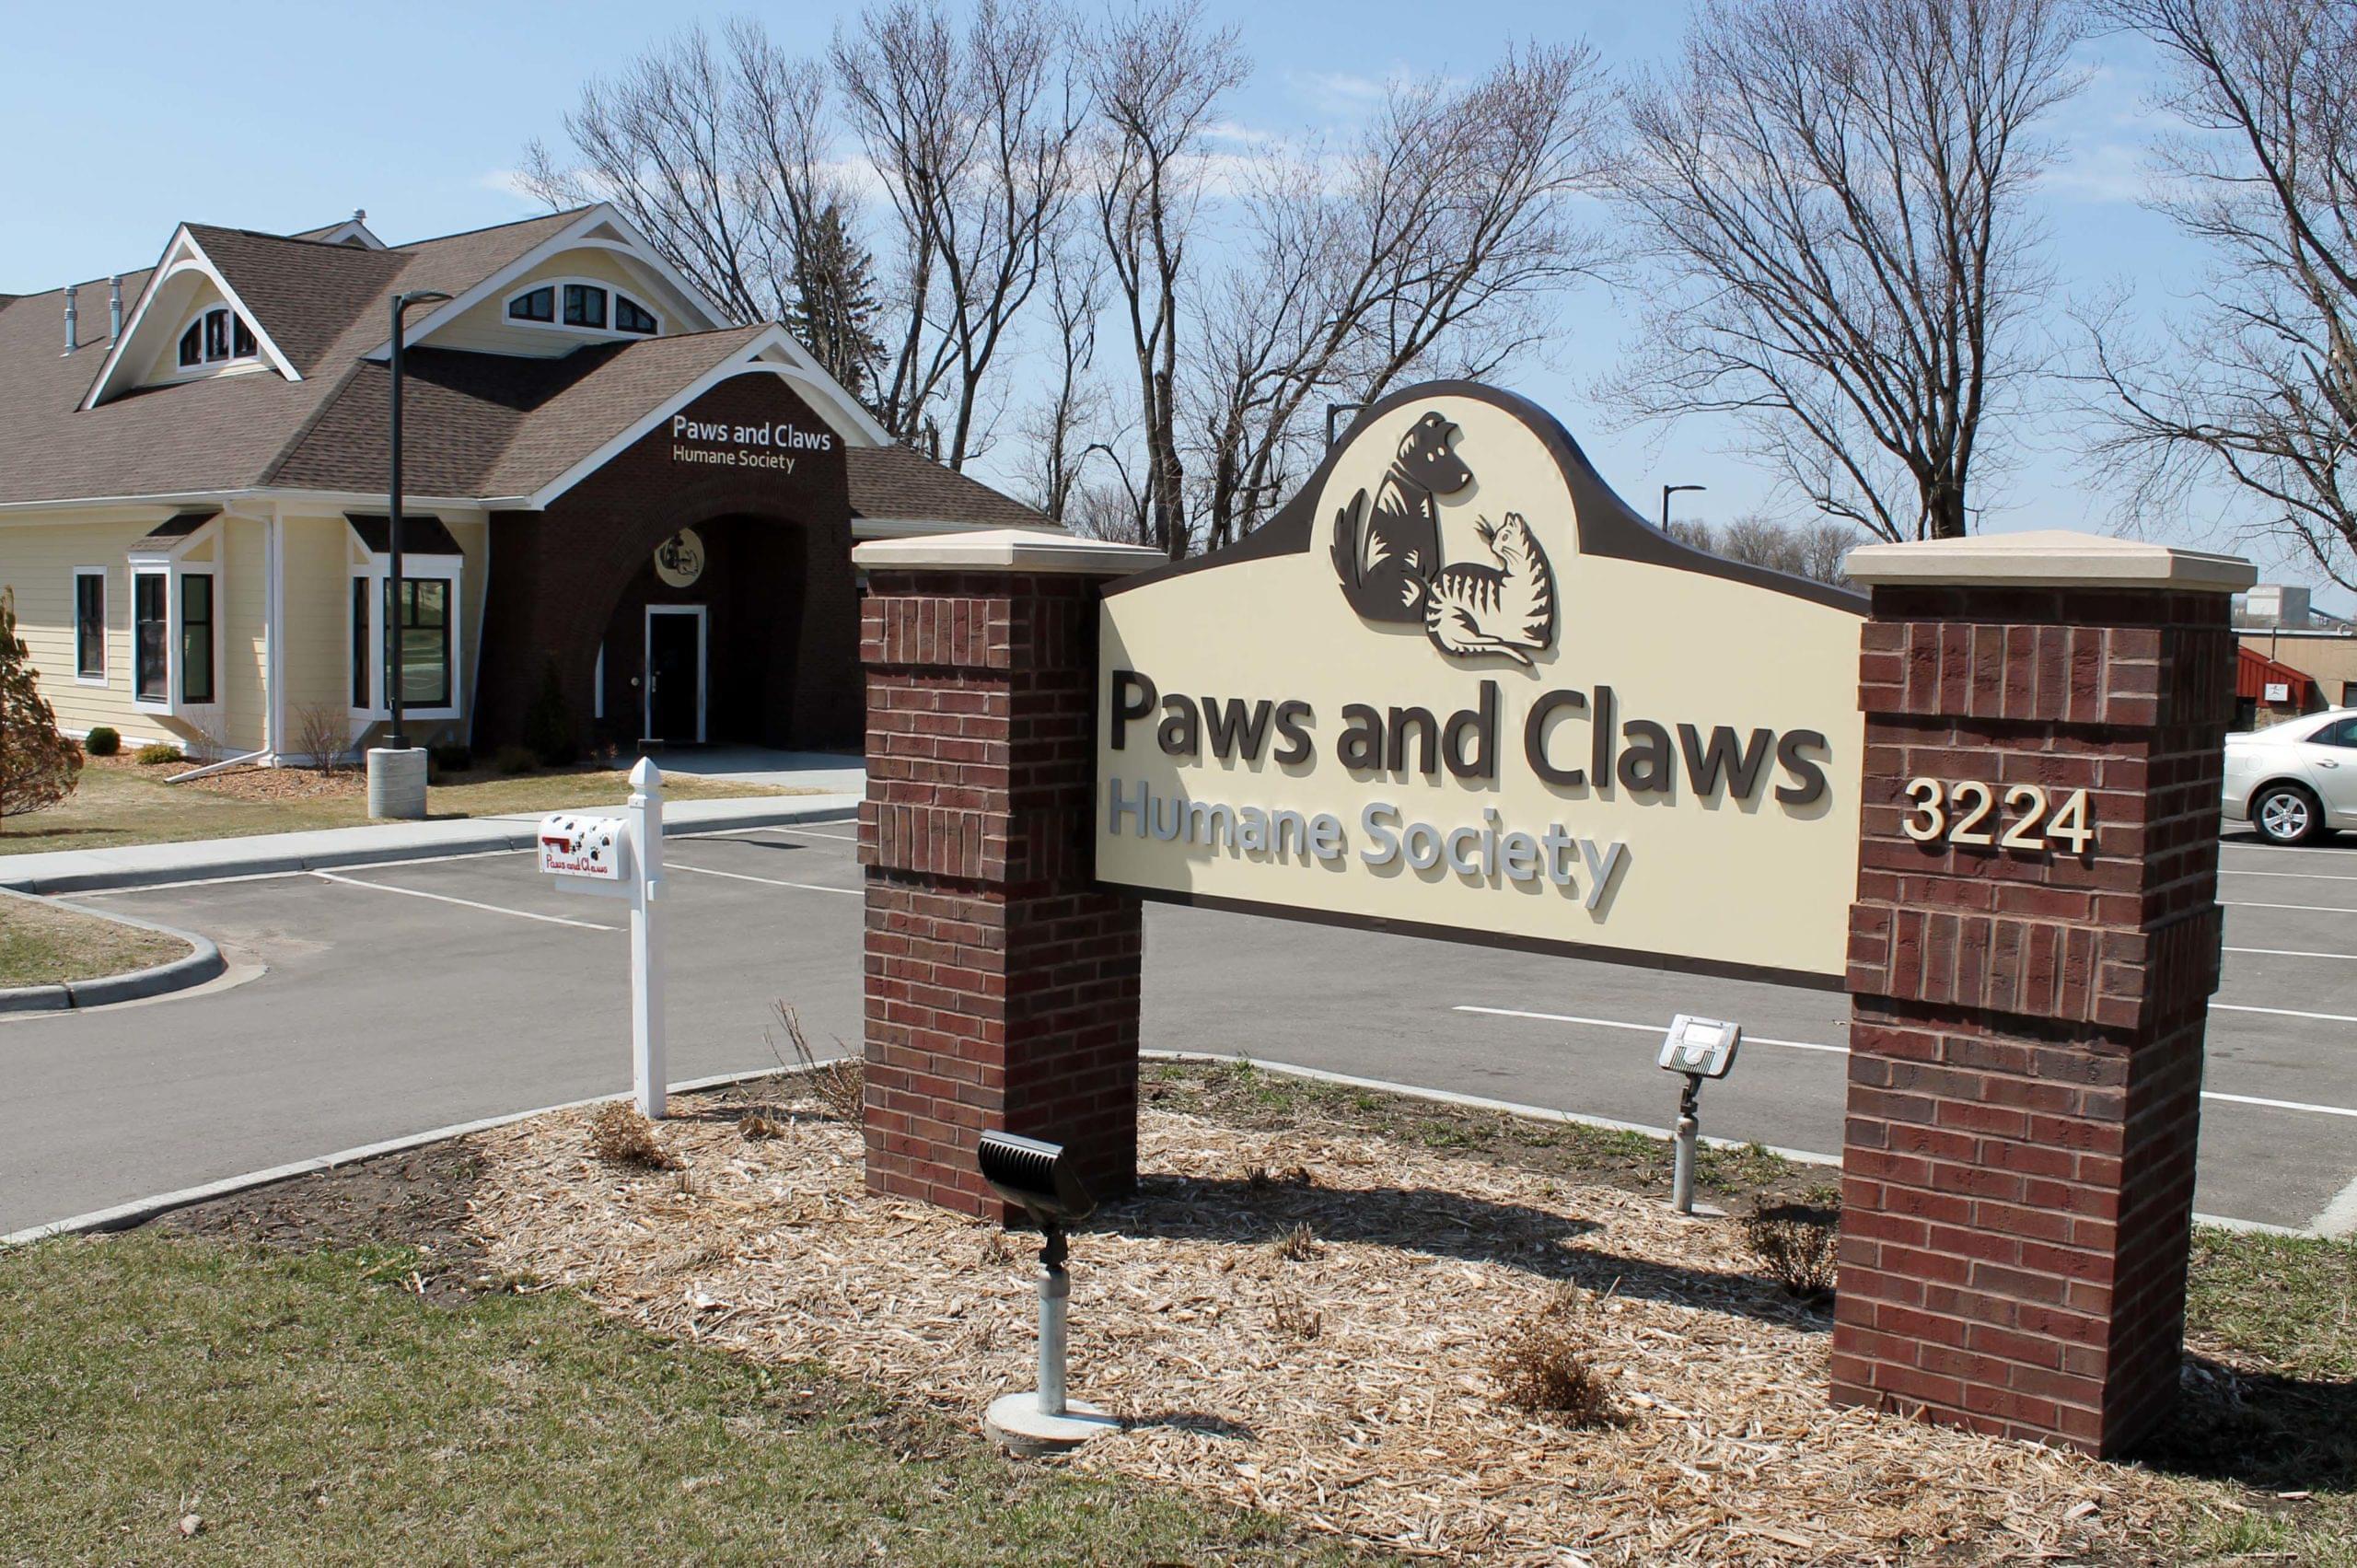 Our Facility – Paws and Claws Humane Society